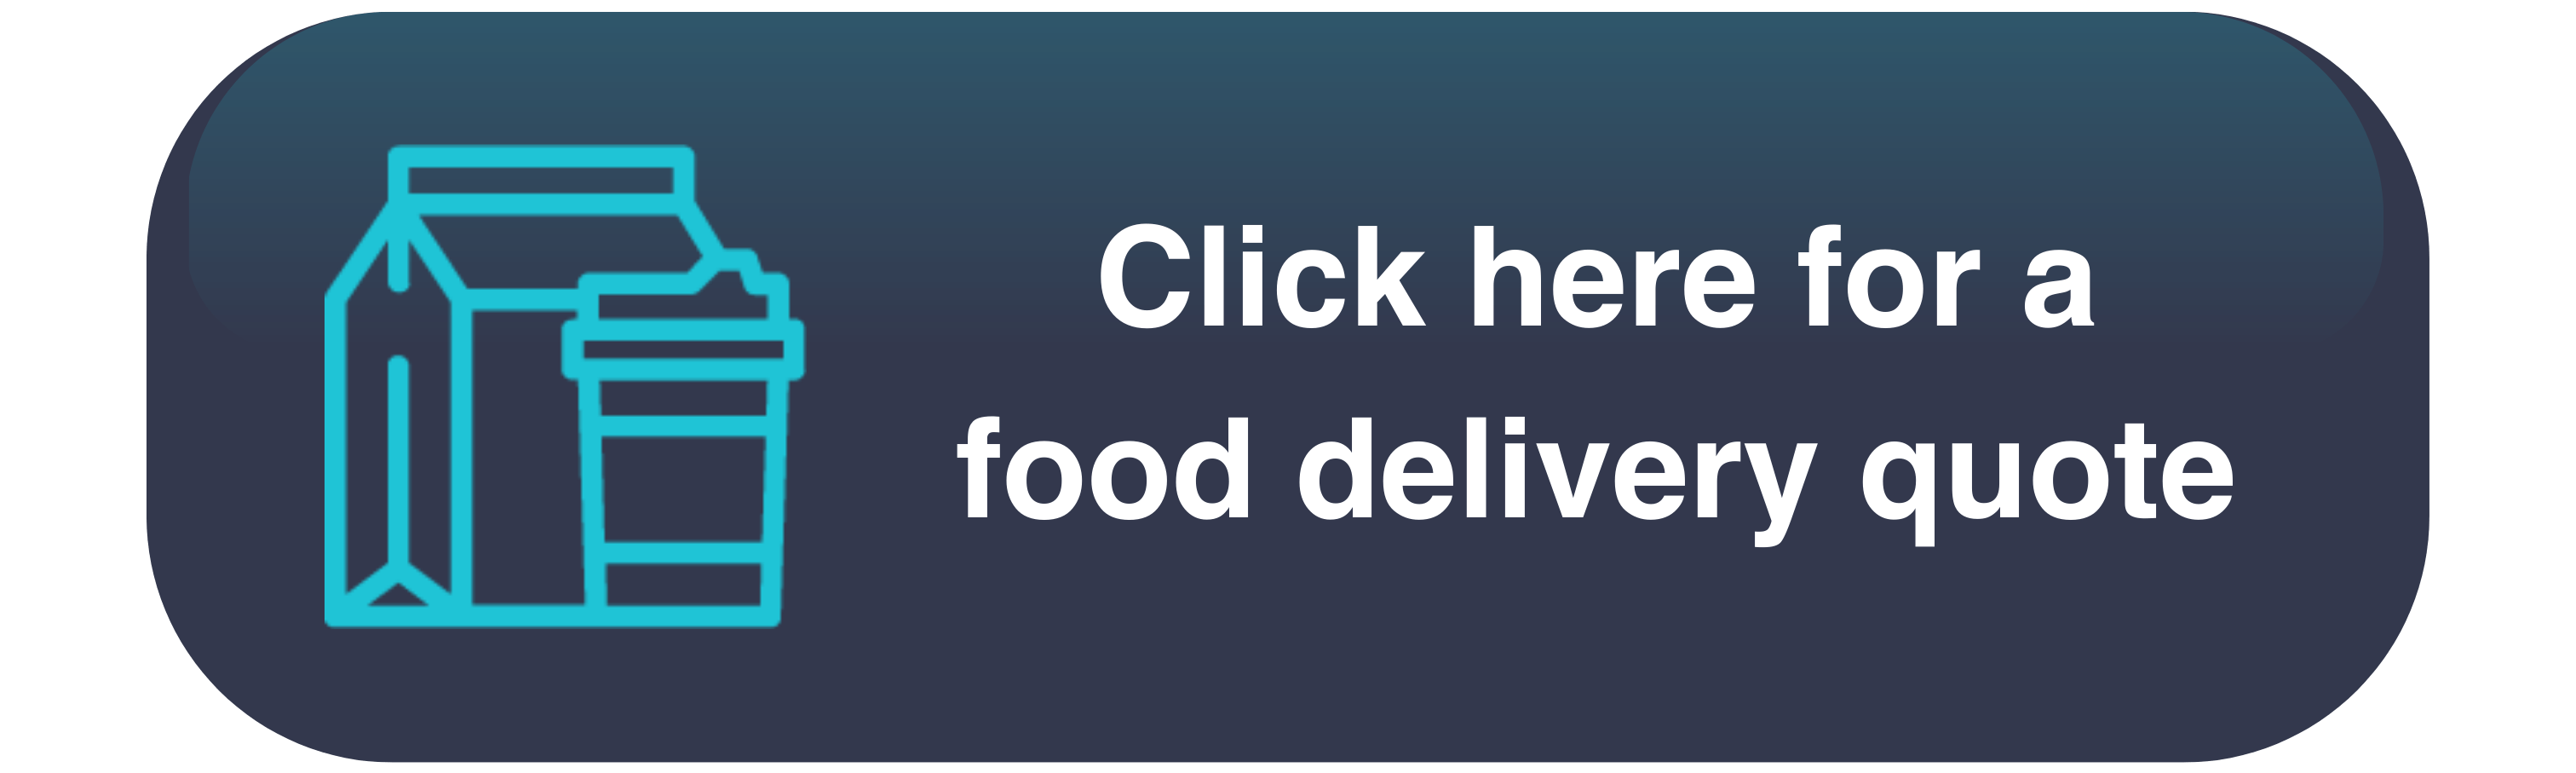 food delivery insurance Safety tips for pizza delivery drivers